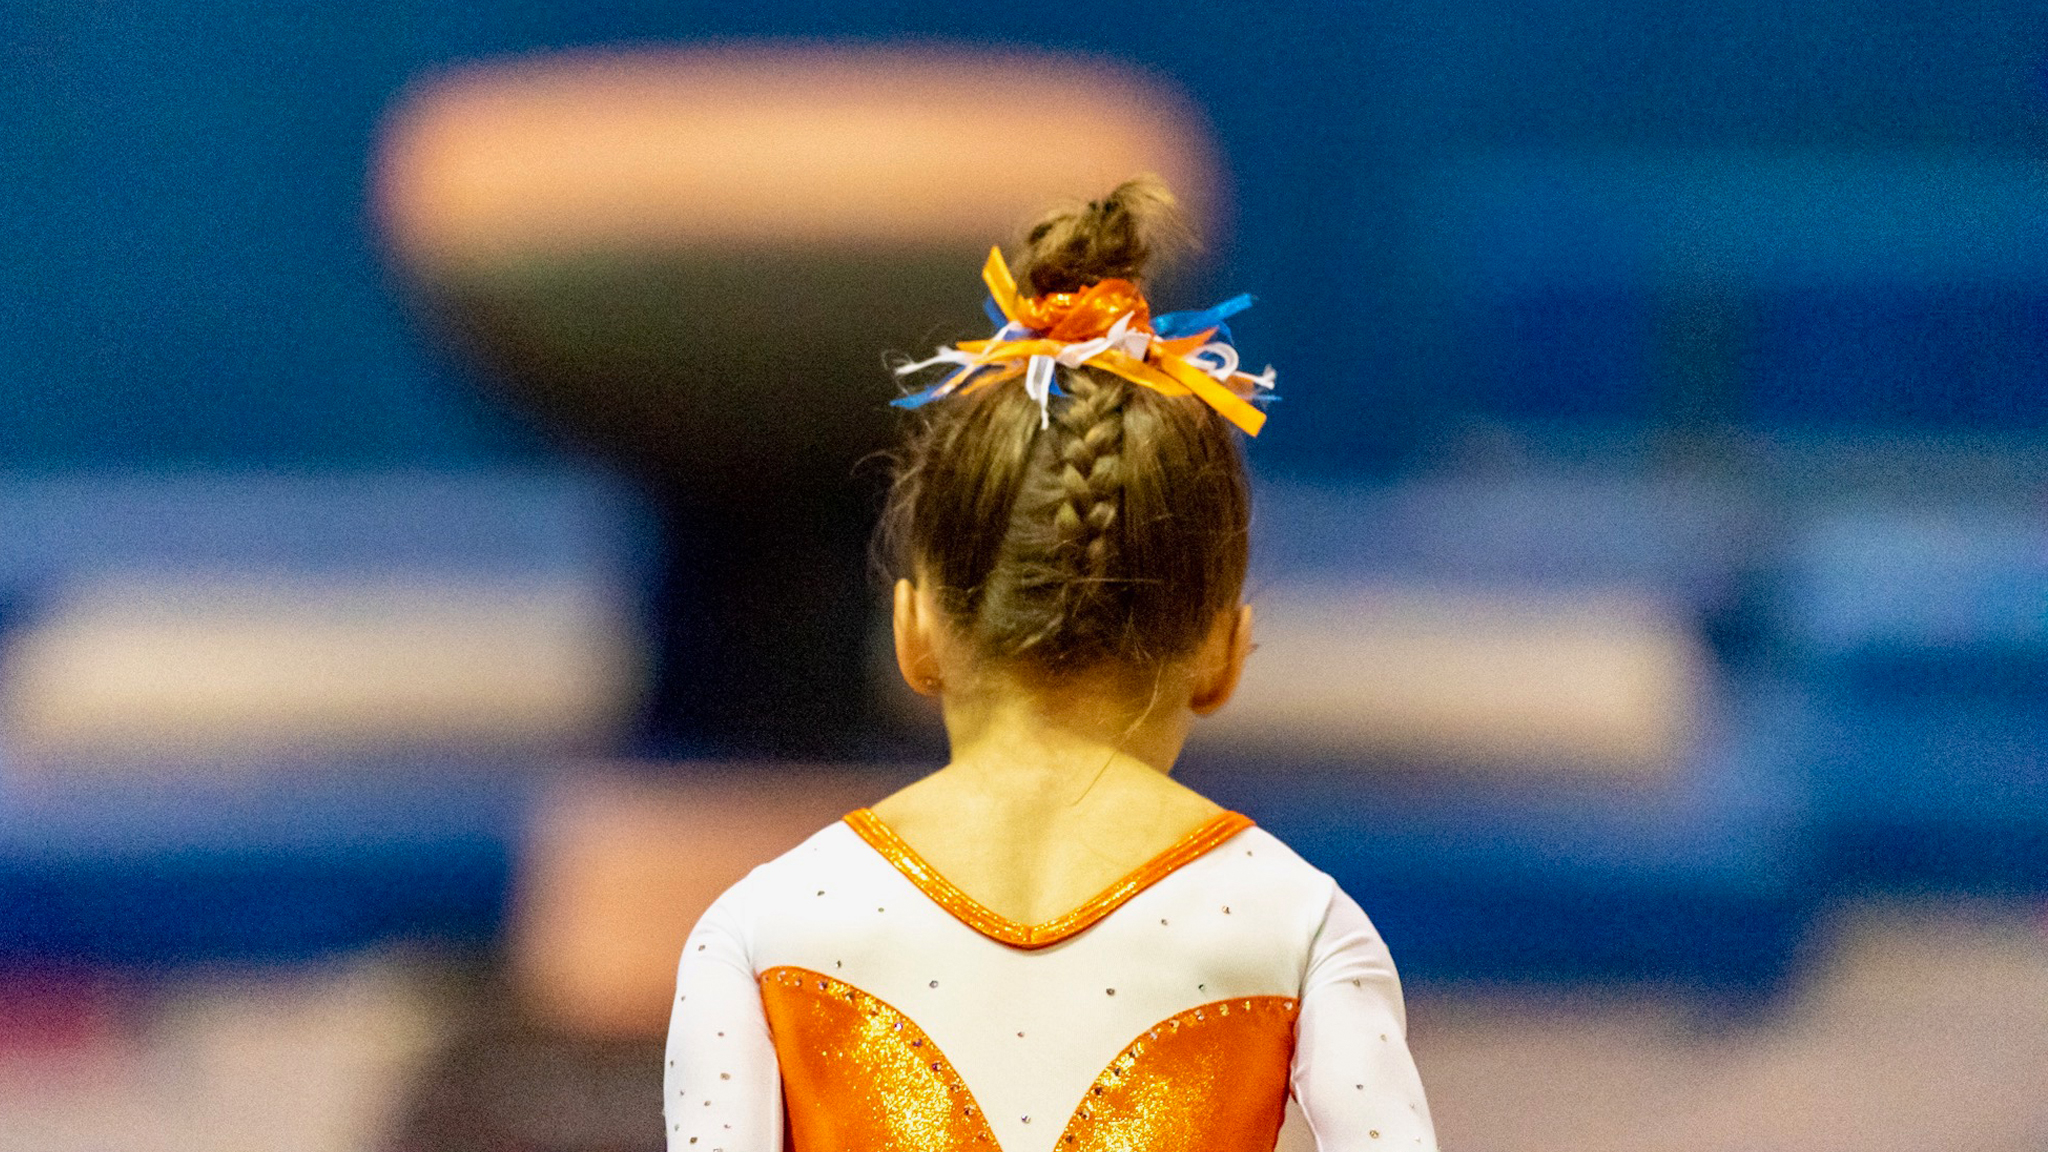 back of girl gymnast about to perform